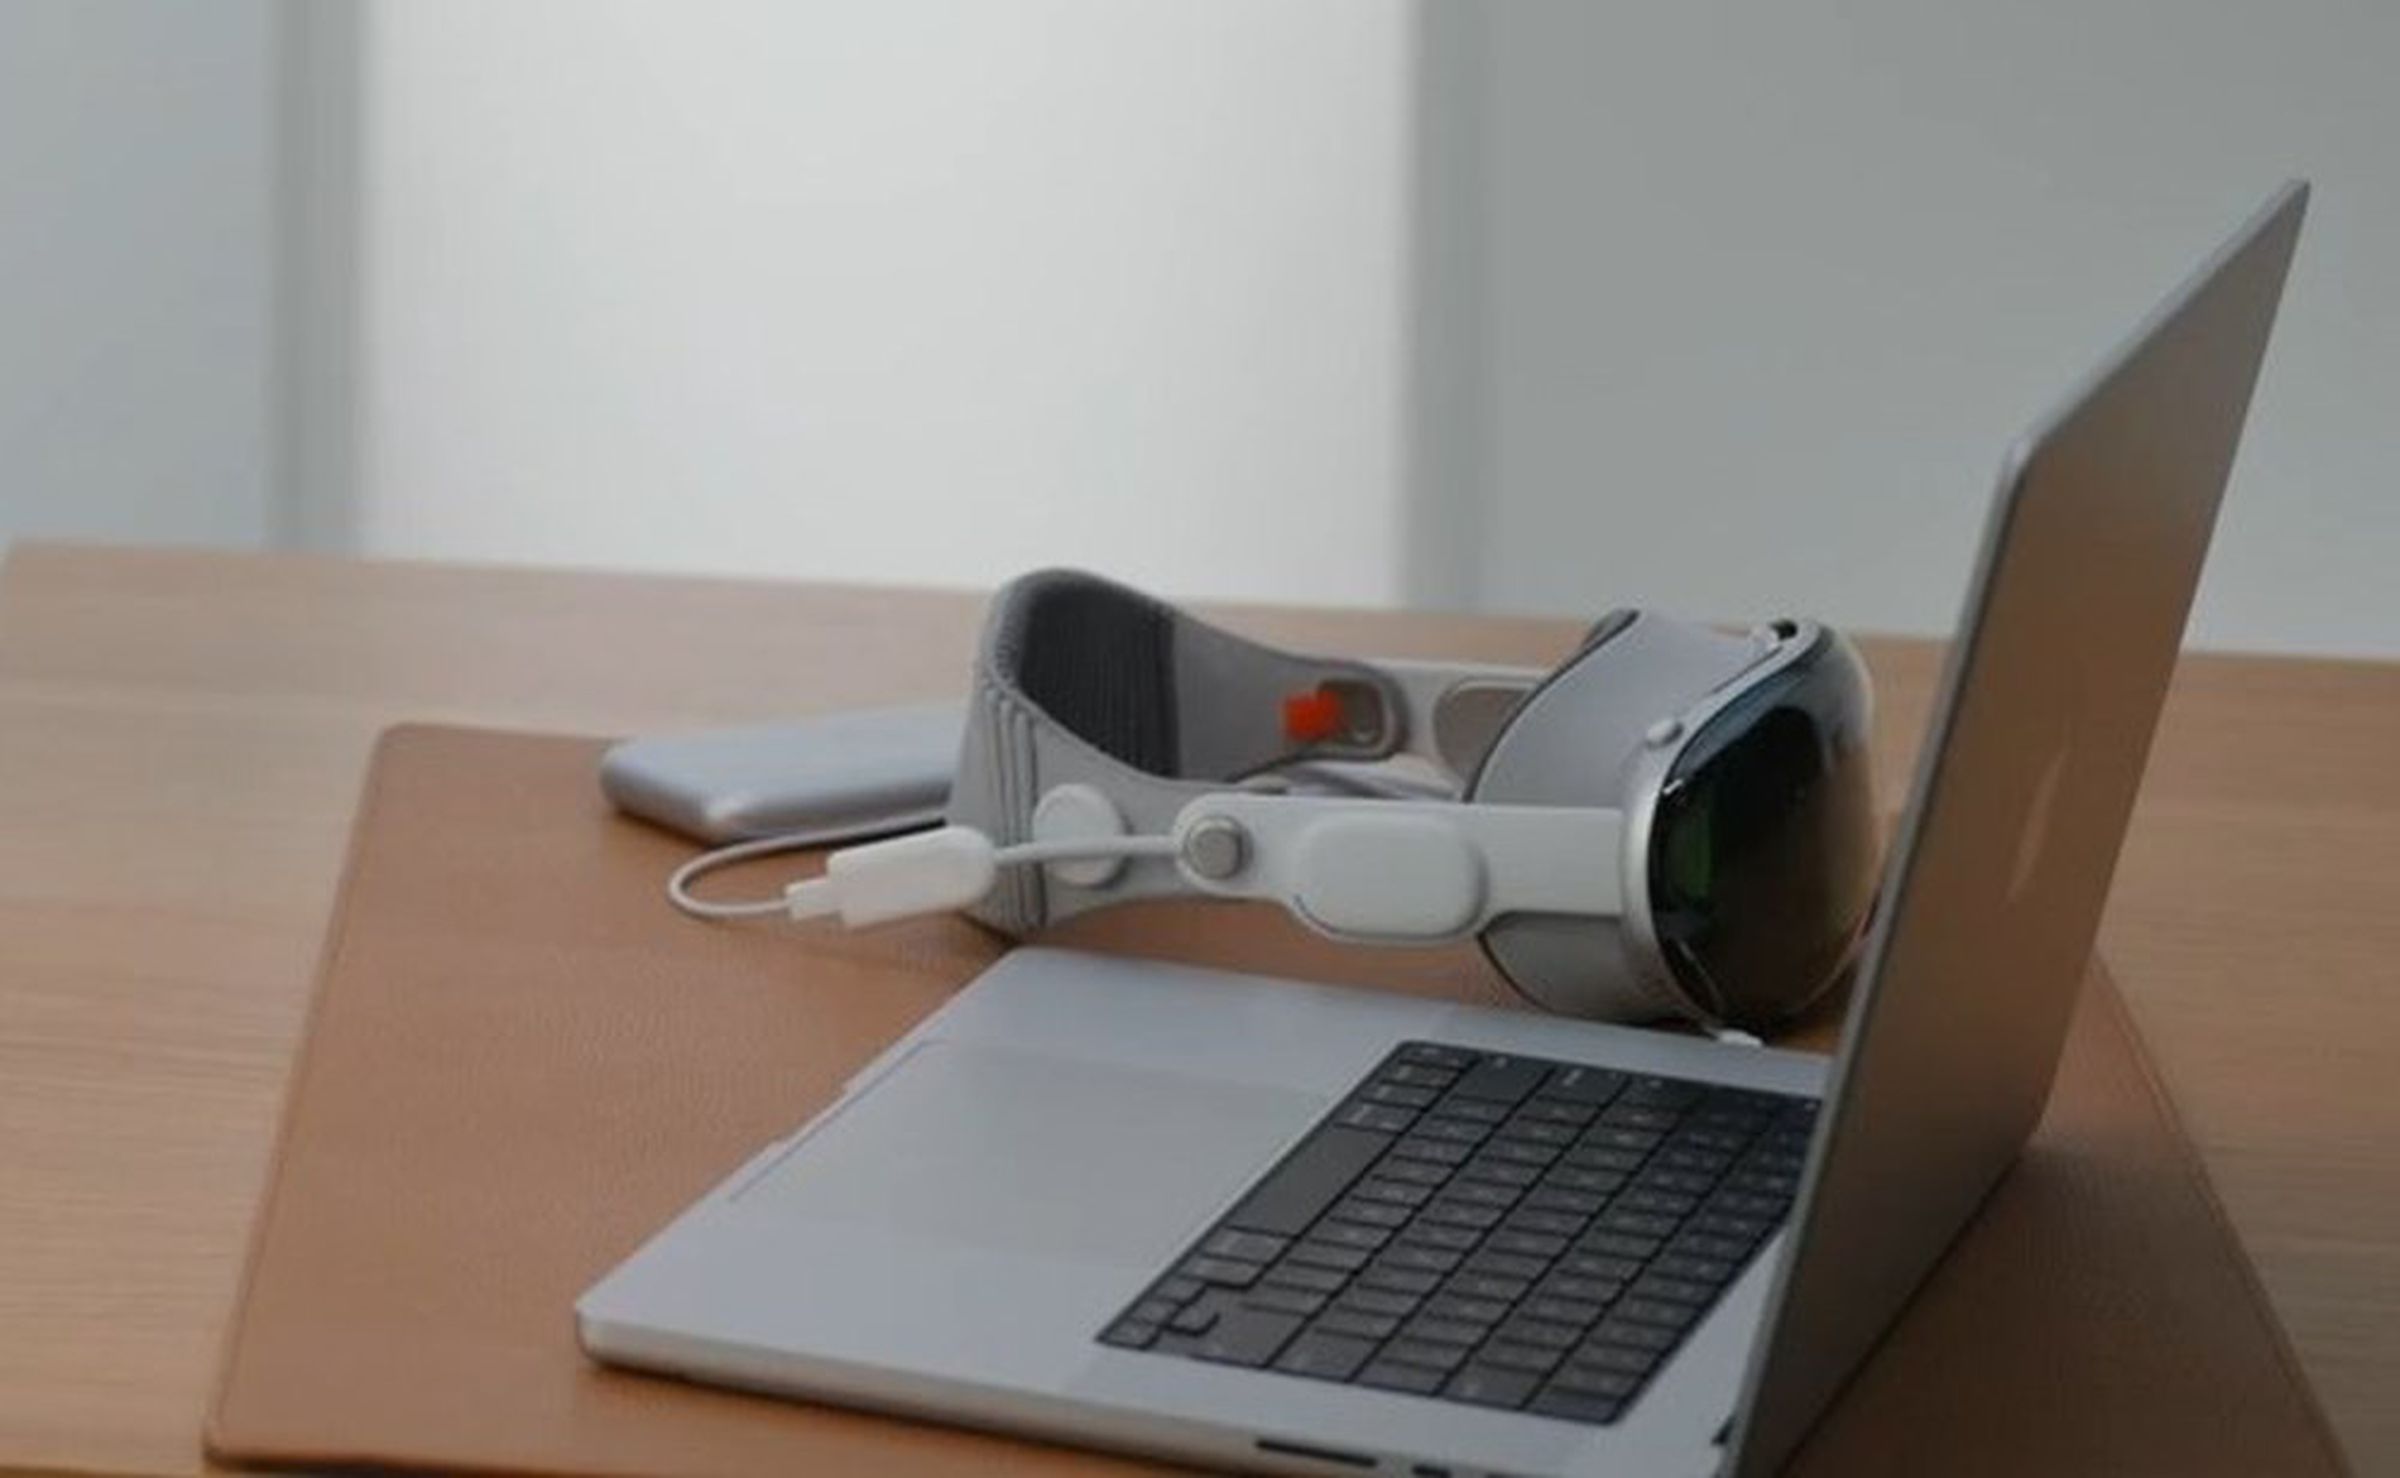 Screenshot of an Apple video showing the Vision Pro connected to a Mac via a USB-C dongle.